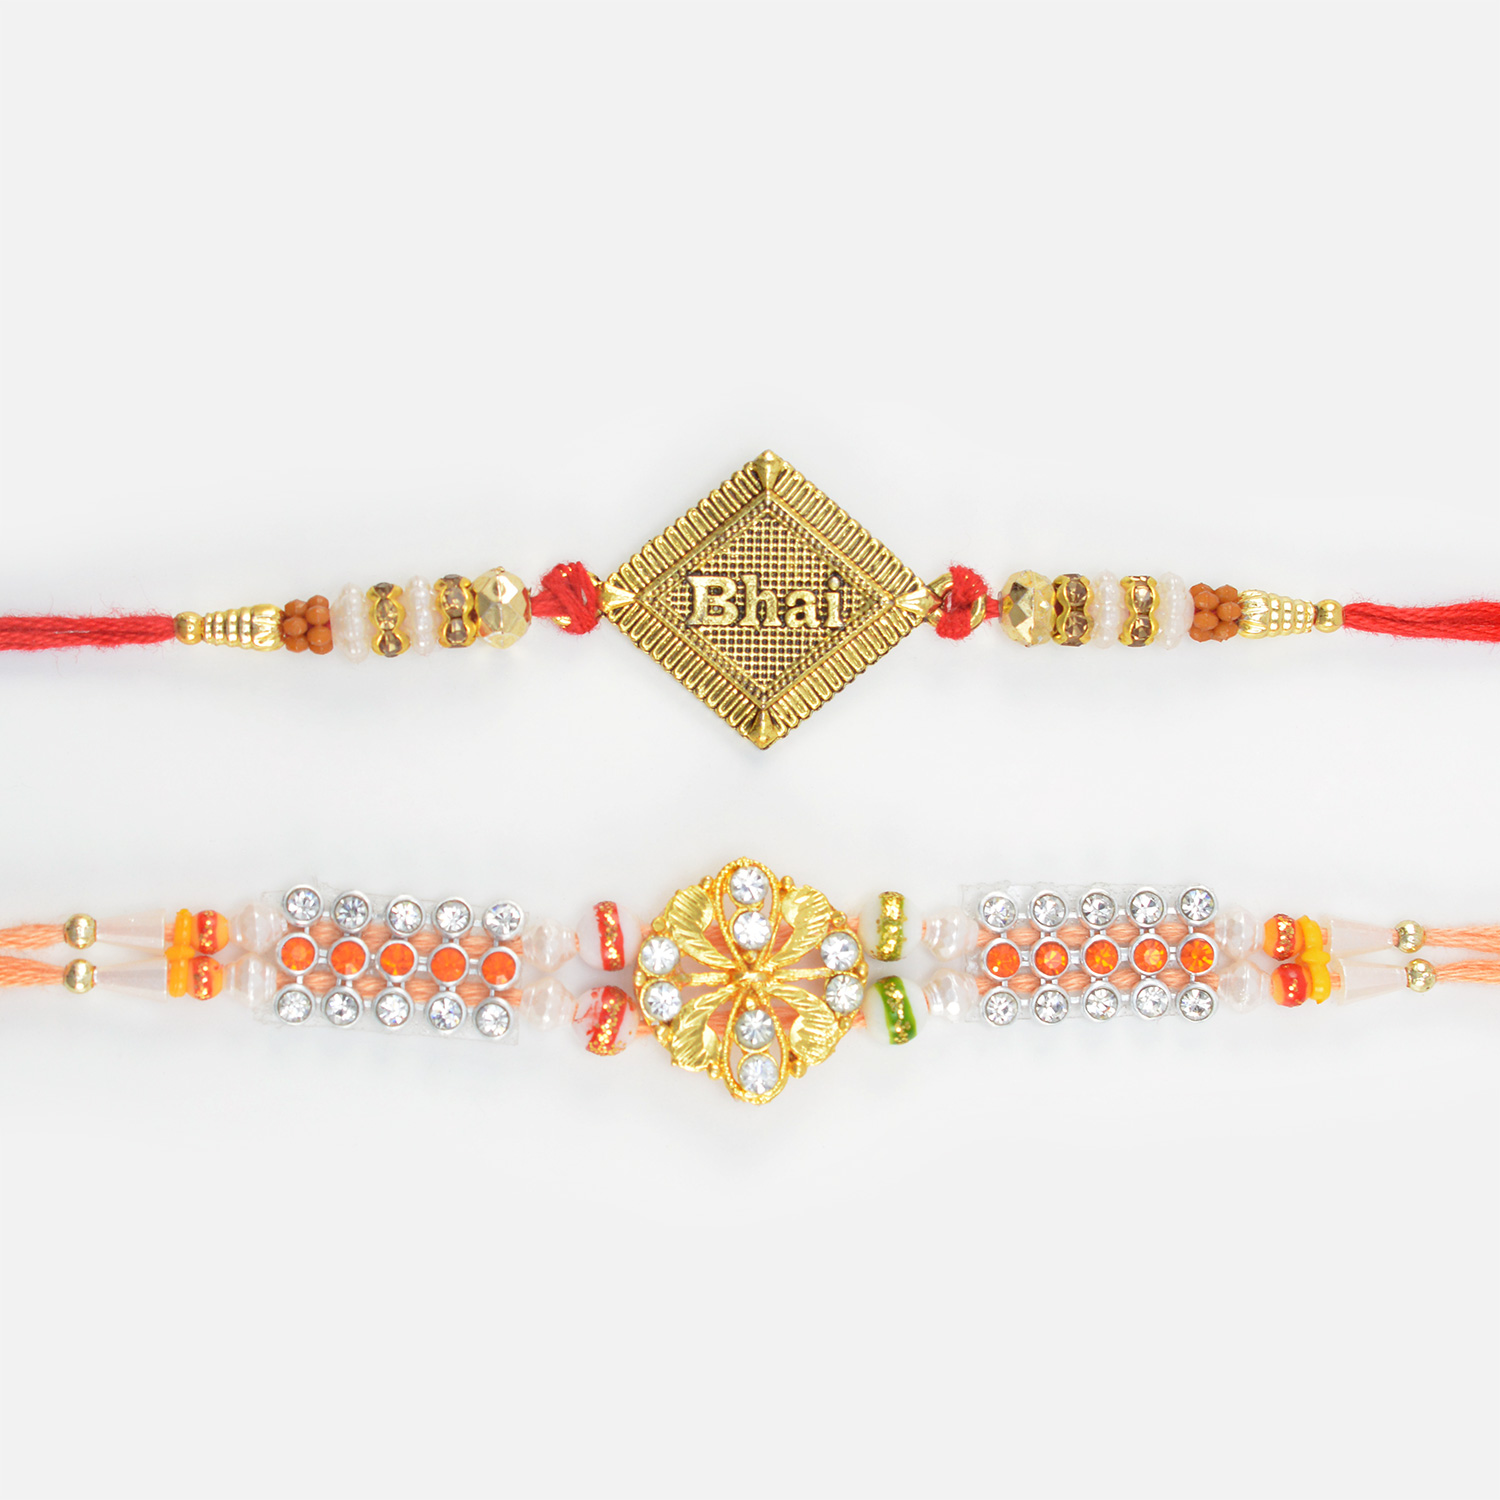 Special Bhai Written Bhai Rakhi with Liner Dotted Jewel Stone Rakhi Set for 2 Brothers